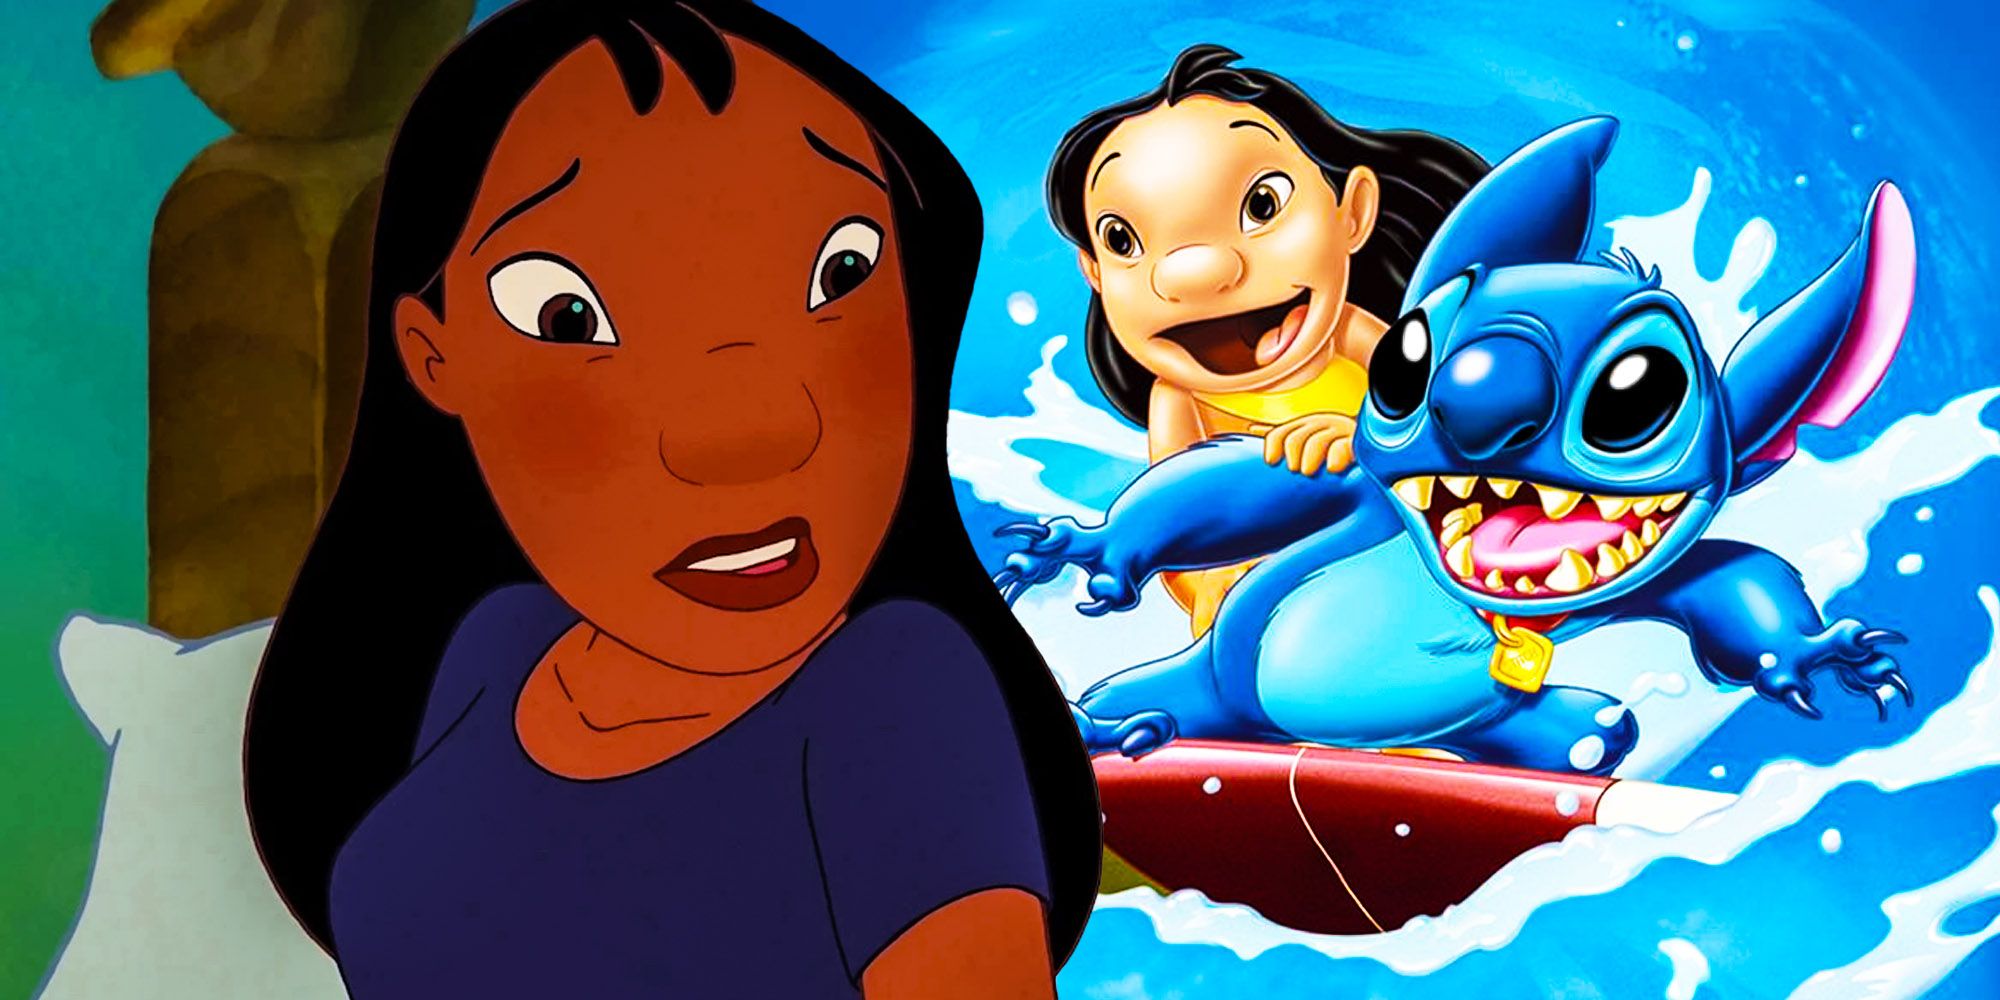 Live action 'Lilo & Stitch' casting proves disastrous – The Oswegonian